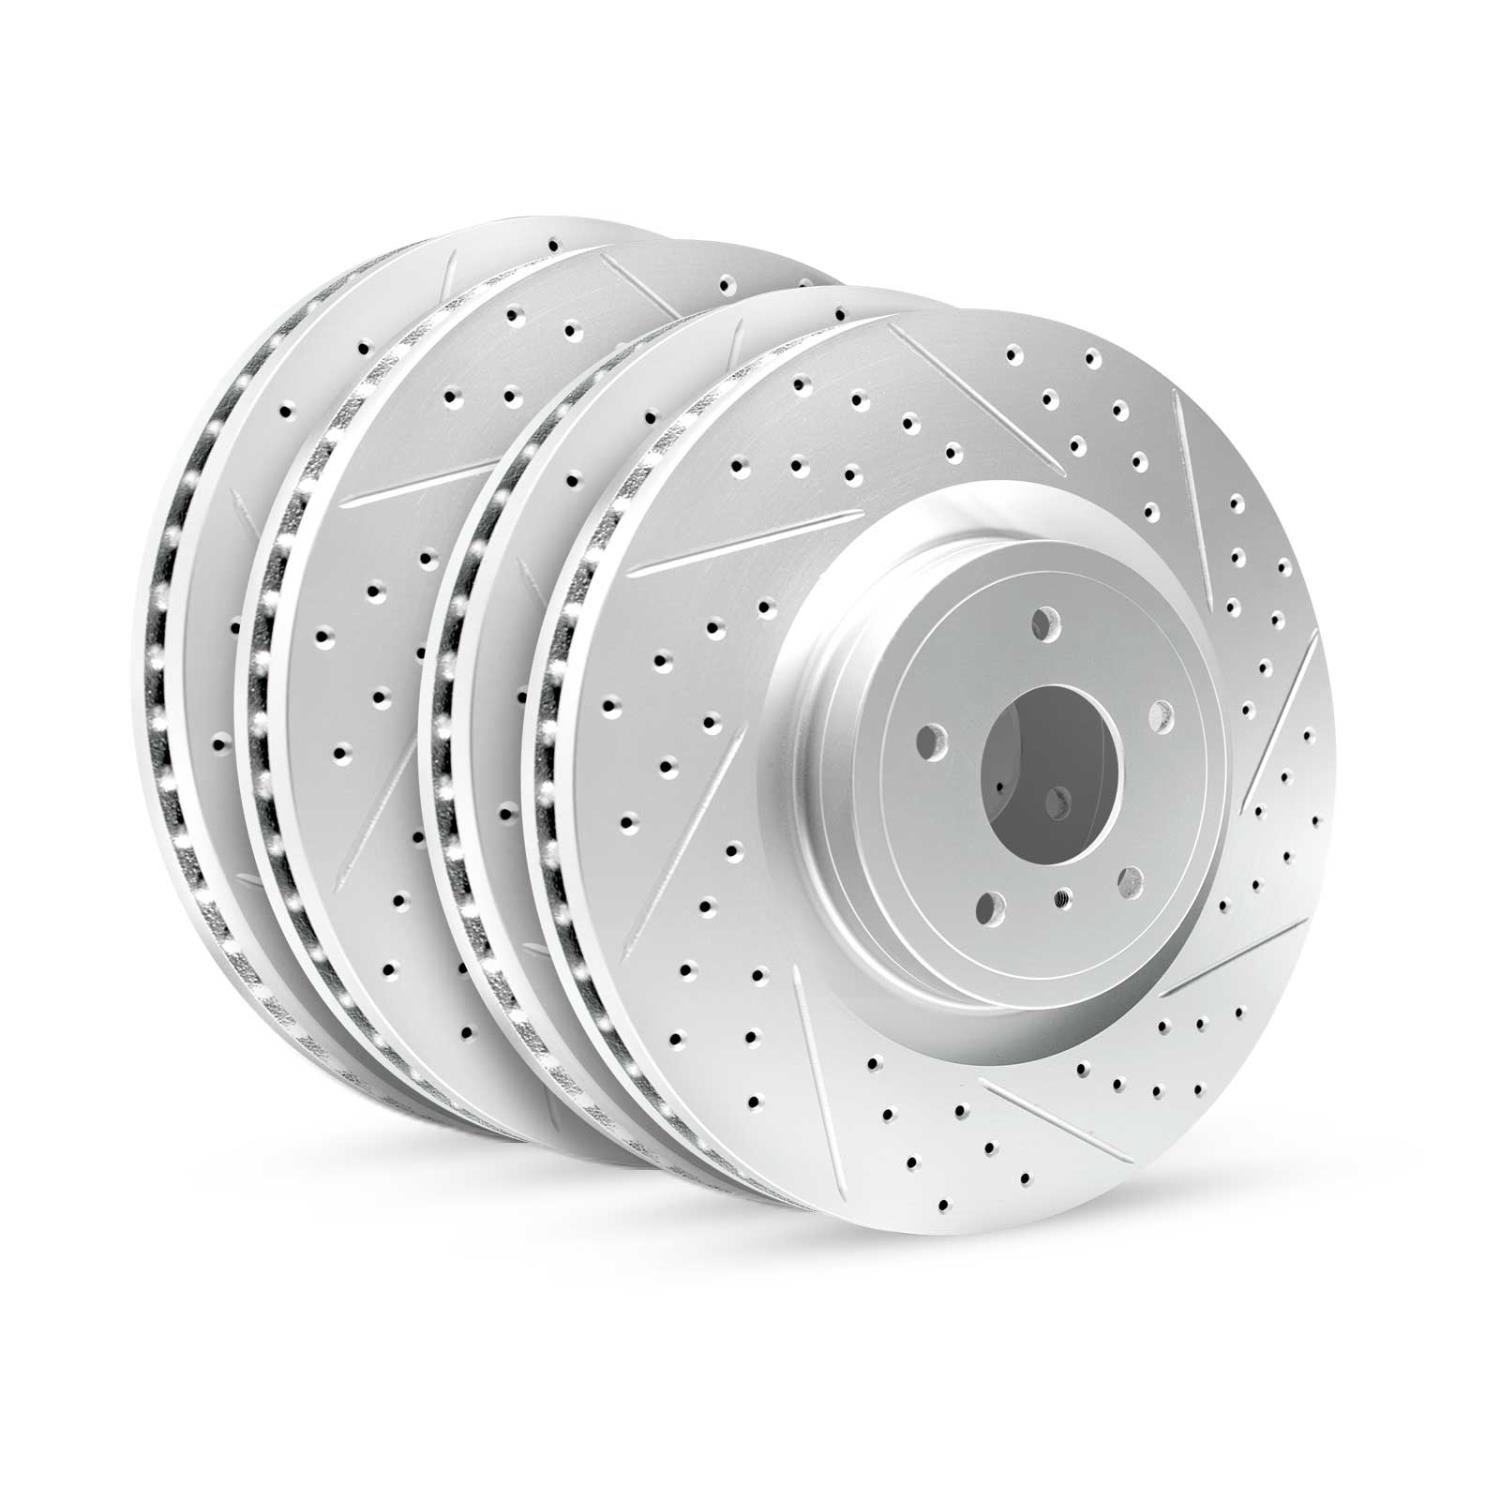 GEO-Carbon Drilled/Slotted Rotors, 2006-2006 BMW, Position: Front/Rear